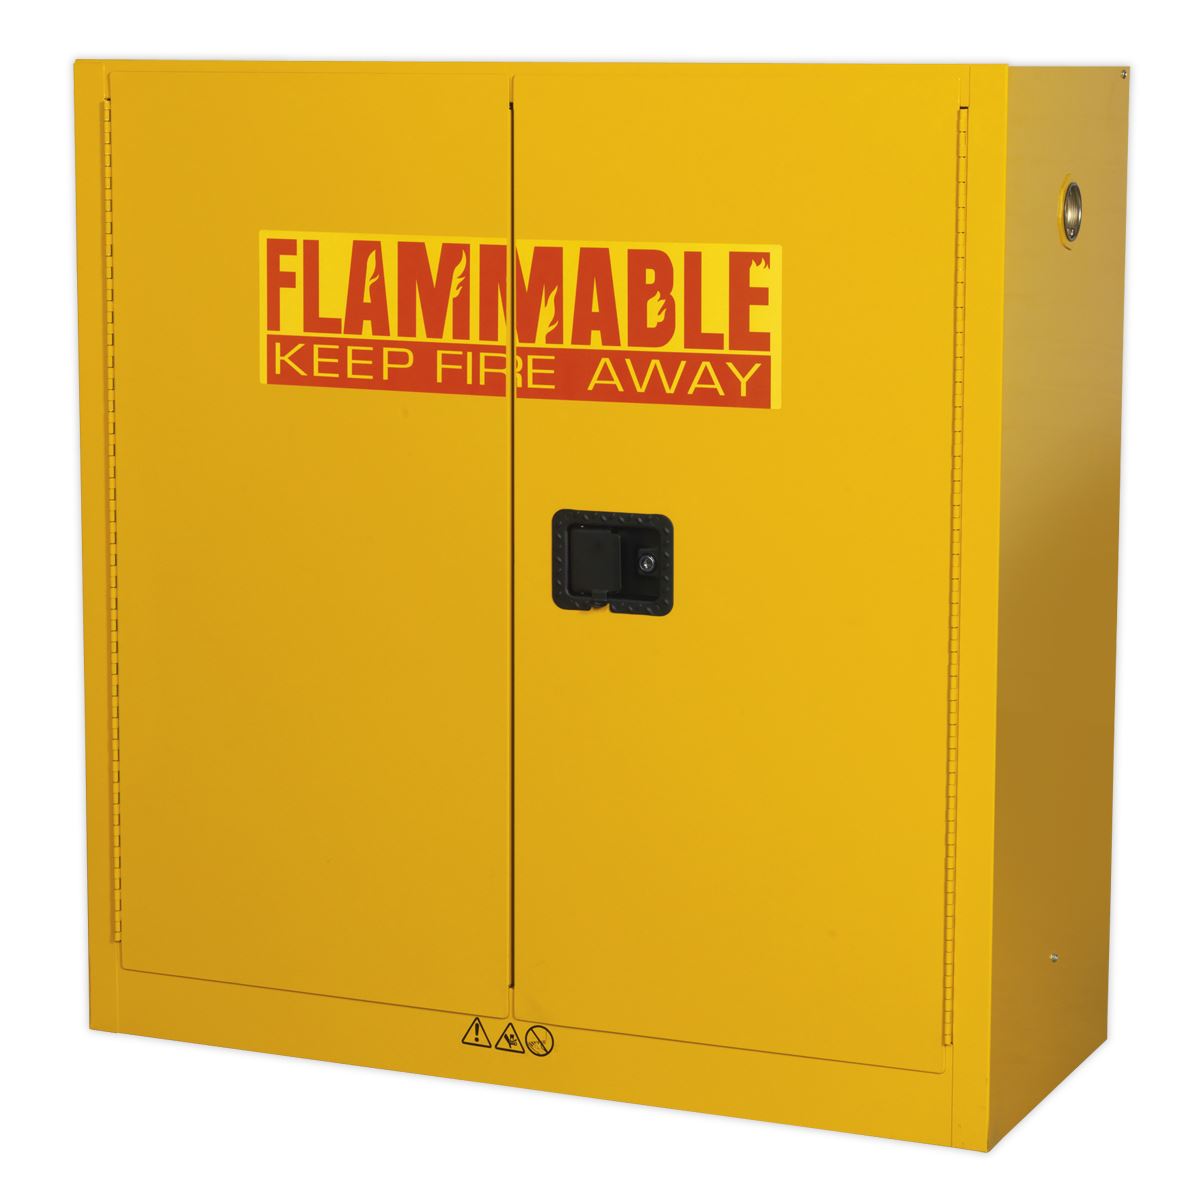 Sealey Flammables Storage Cabinet 1095 x 460 x 1120mm